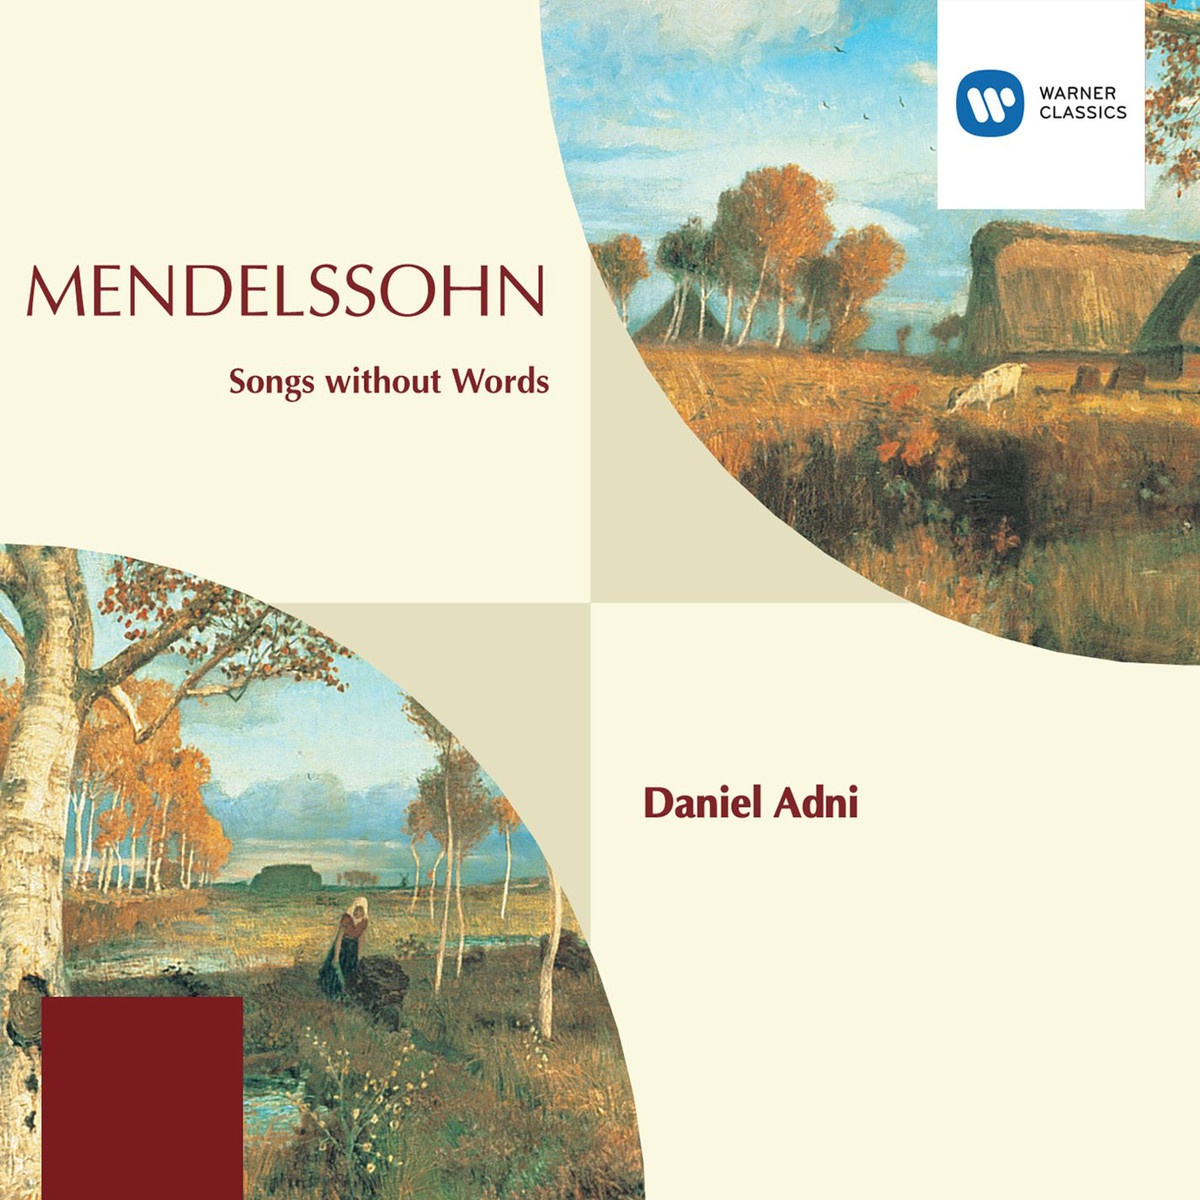 Songs without Words (1996 Digital Remaster): Andante in A minor, Op. 62 No. 5, 'Venetian Gondola Song'